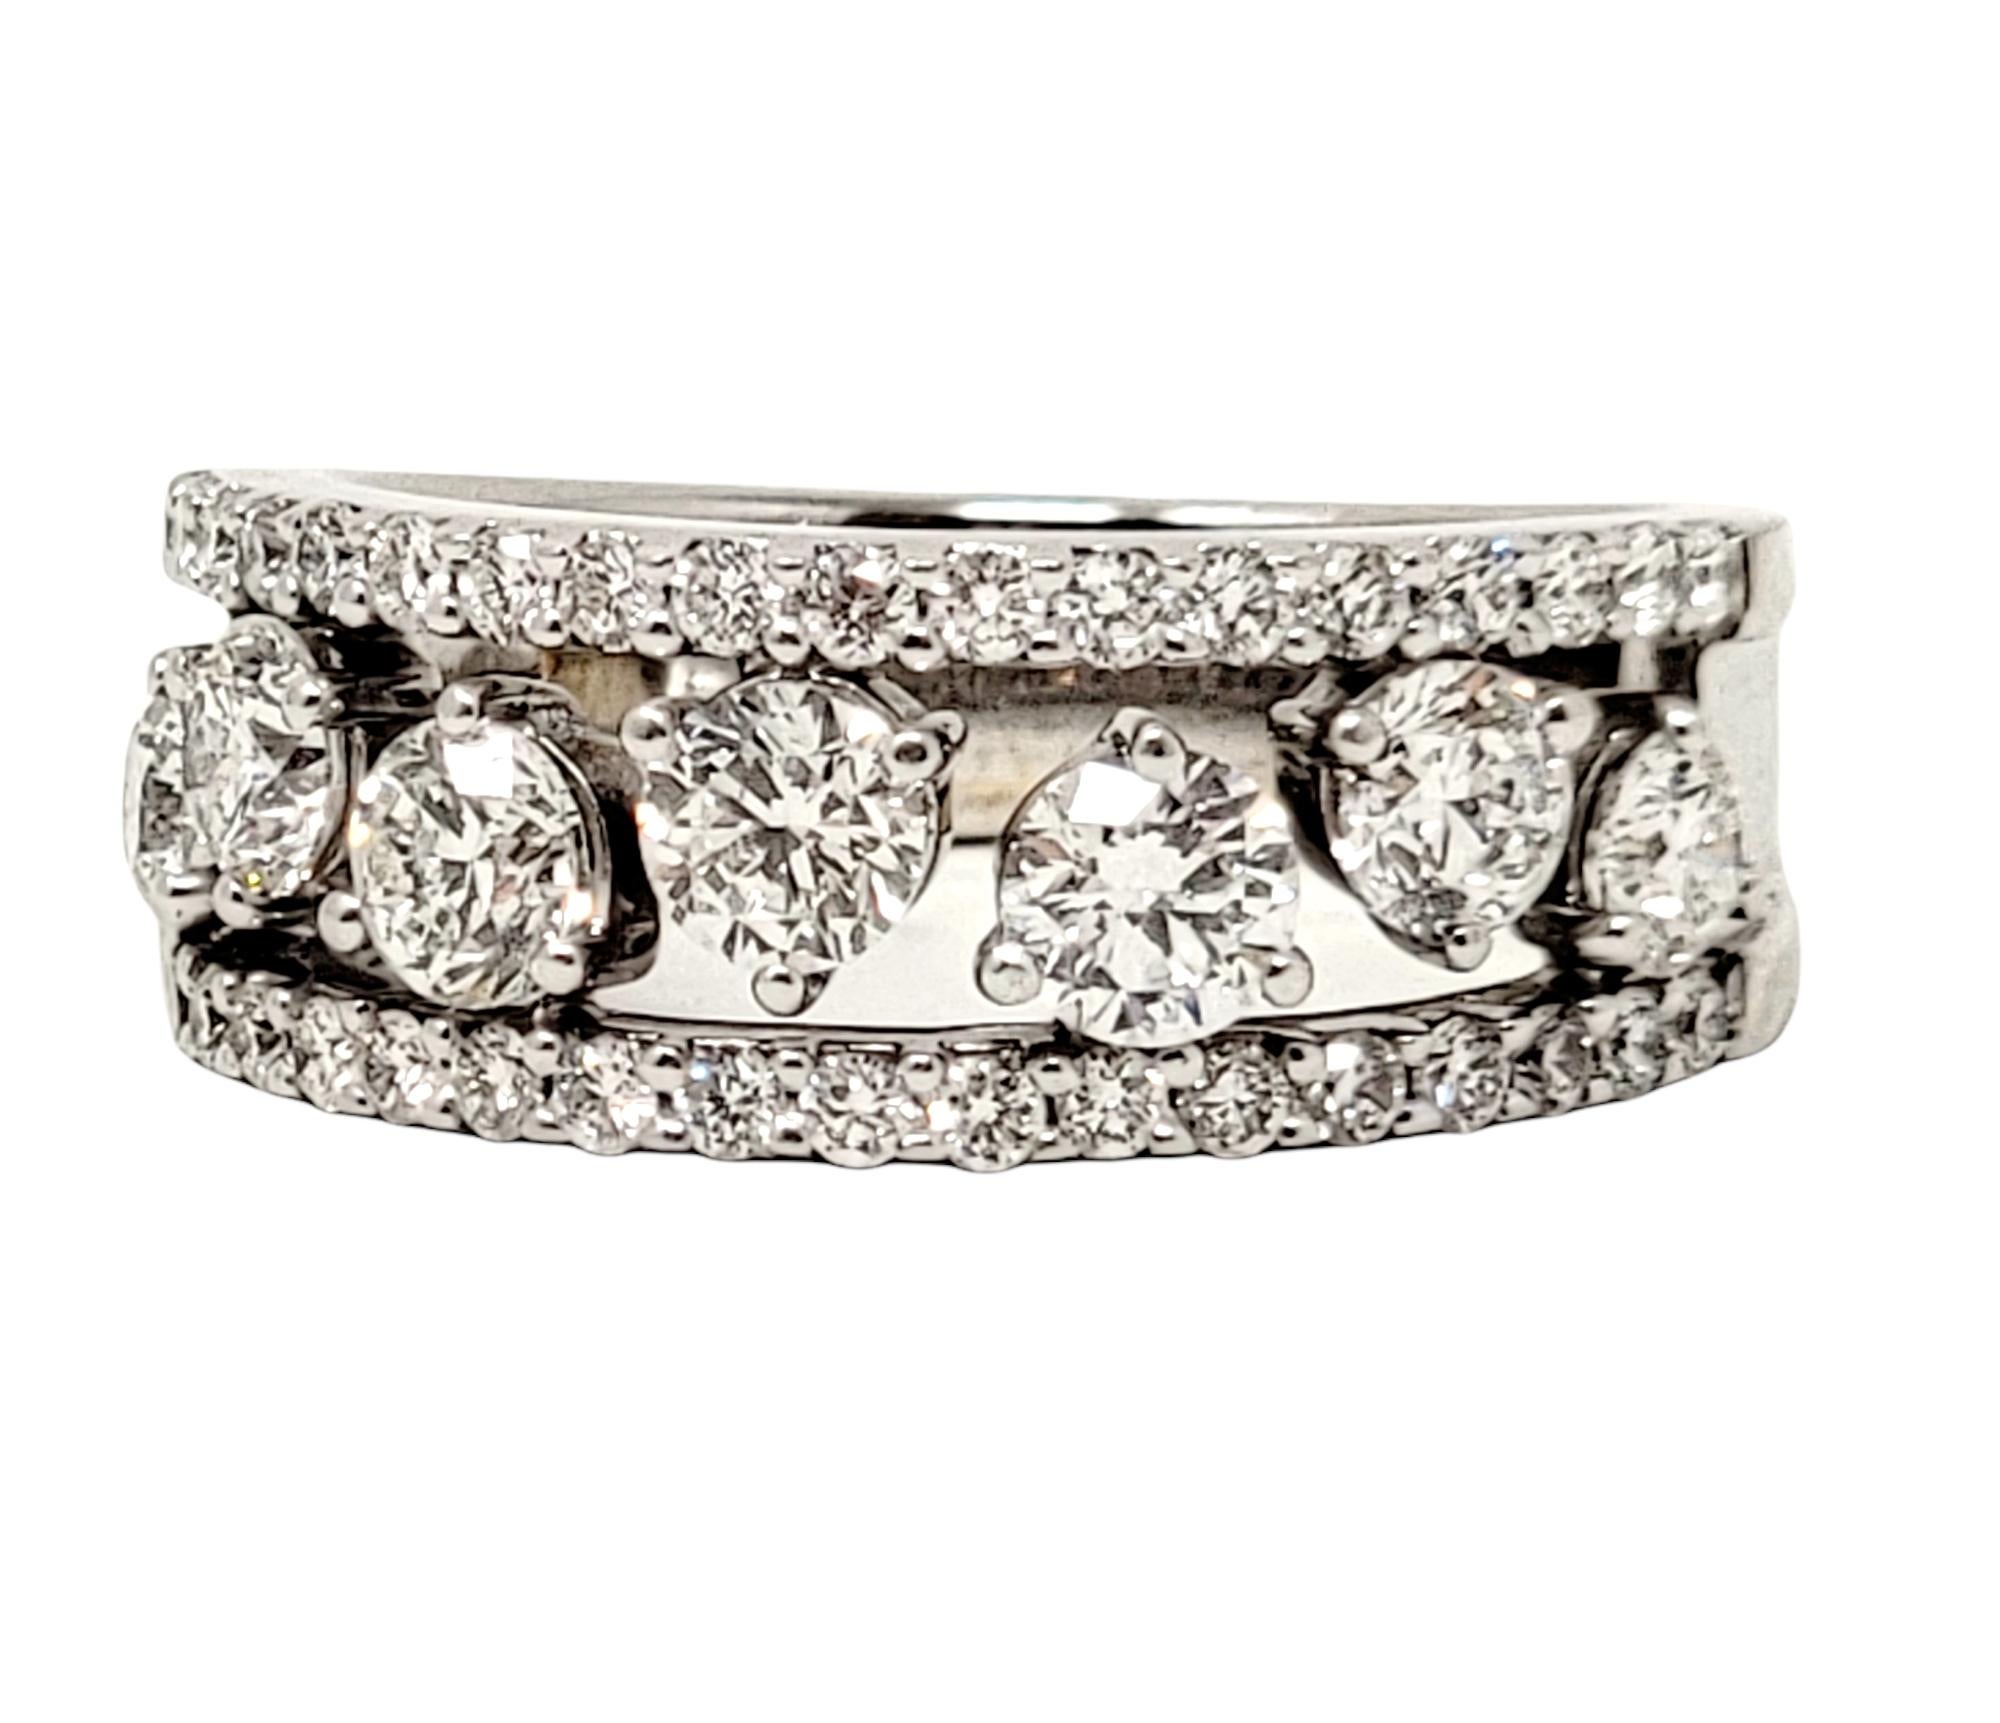 Ring size: 6.75

Absolutely gorgeous contemporary diamond band ring. This incredible ring features a unique modern design paired with natural white diamonds that sparkle and shine from every angle. It absolutely lights up the finger. 
This stunning